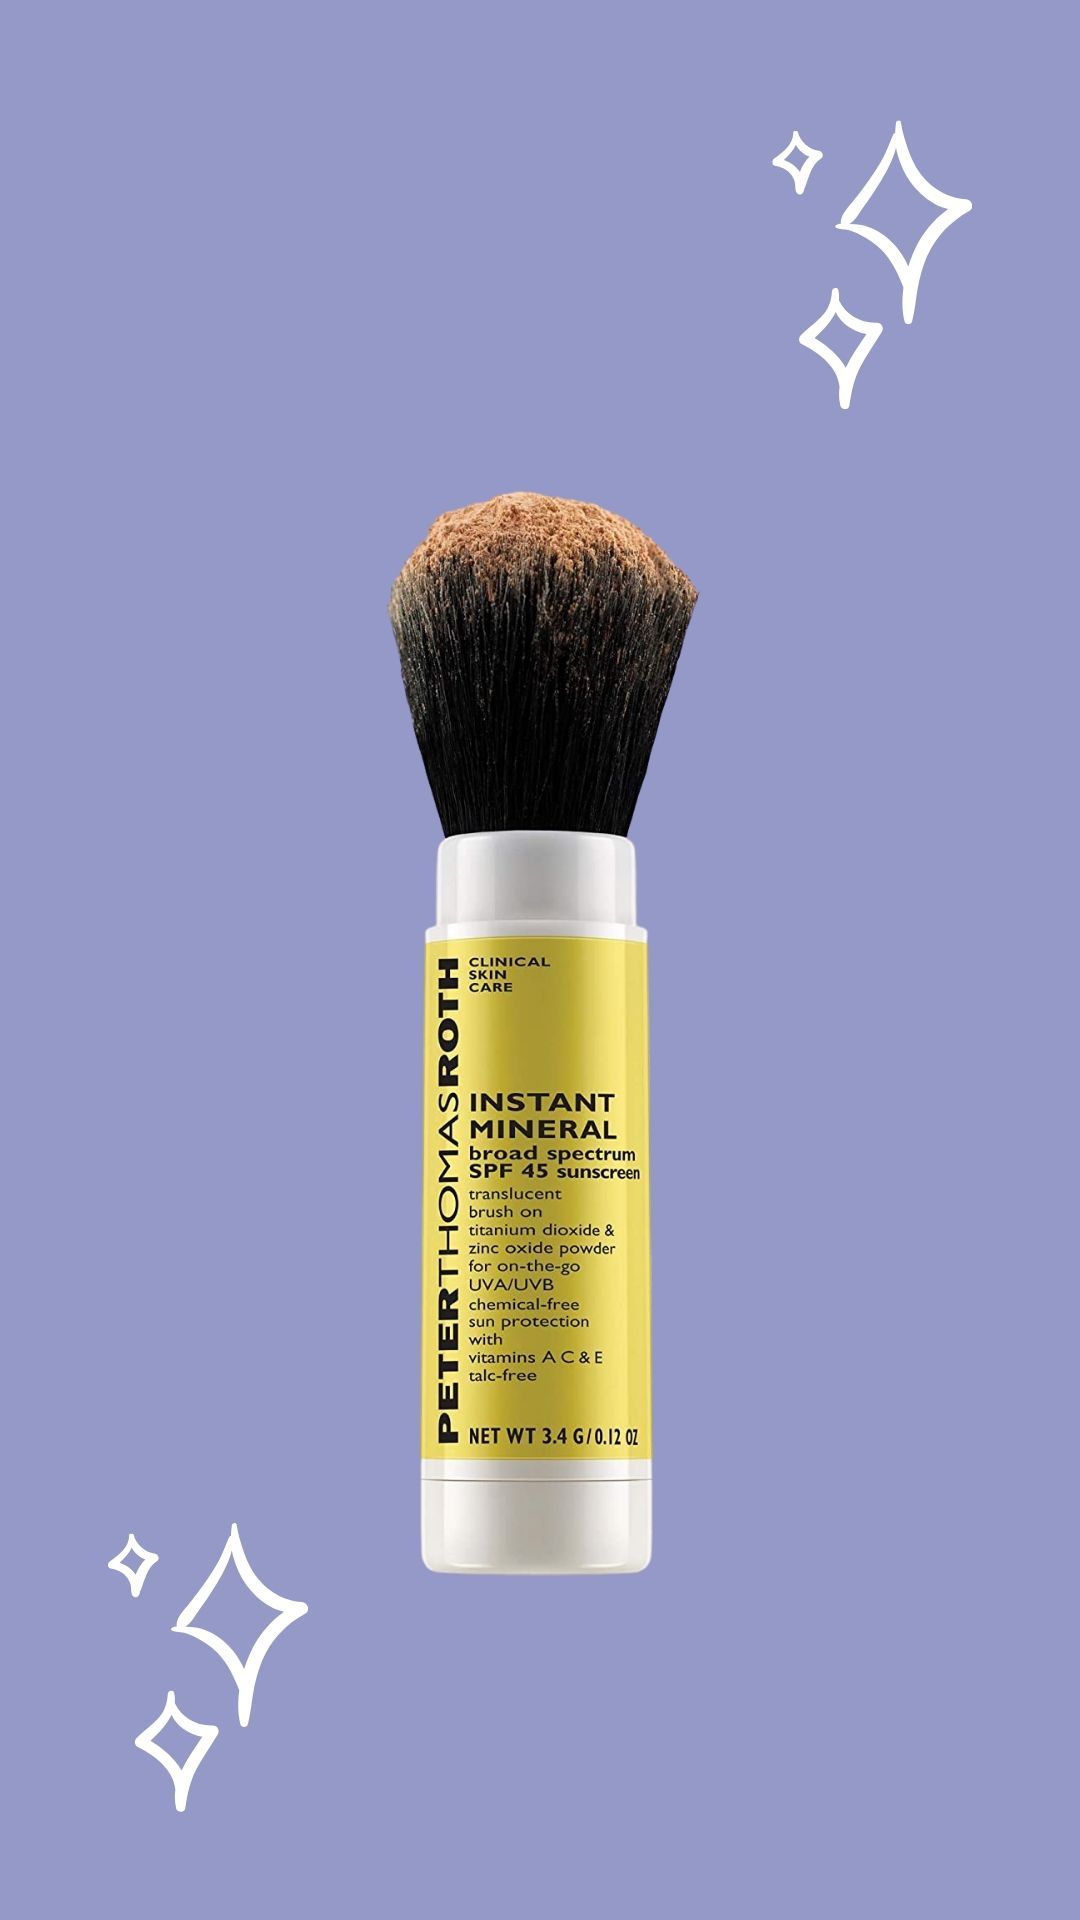 Peter Thomas Roth Mineral Sunscreen Brush, purple background with sparkles